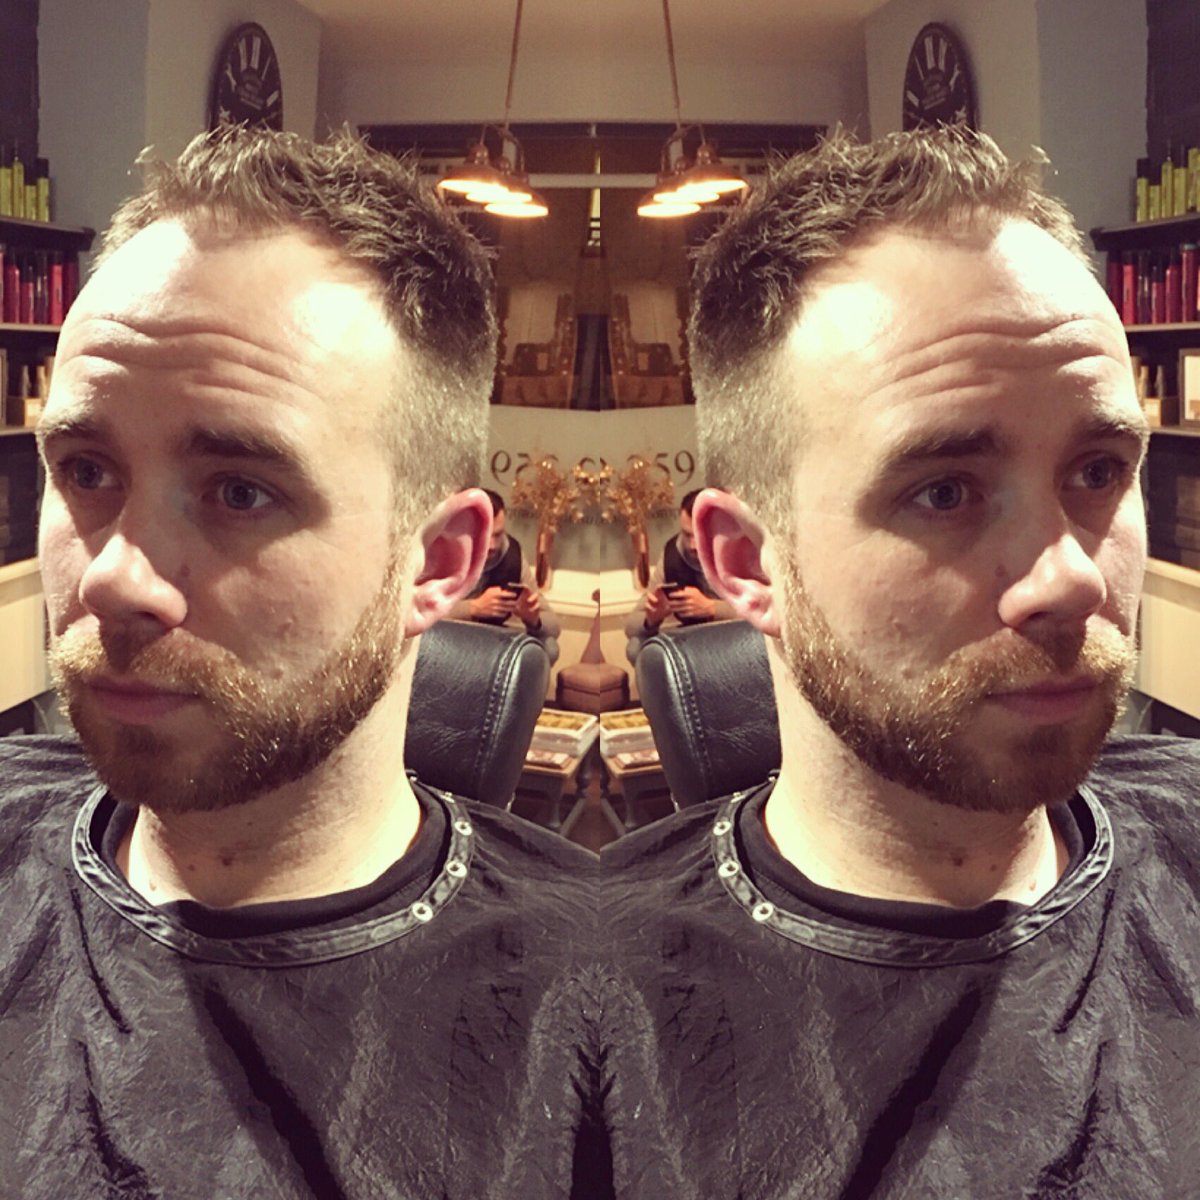 Lovely #menshaircut & #wetshave today! #barber #mensfashion #menshairstyles #cutthroatshave #cambridgebarbers